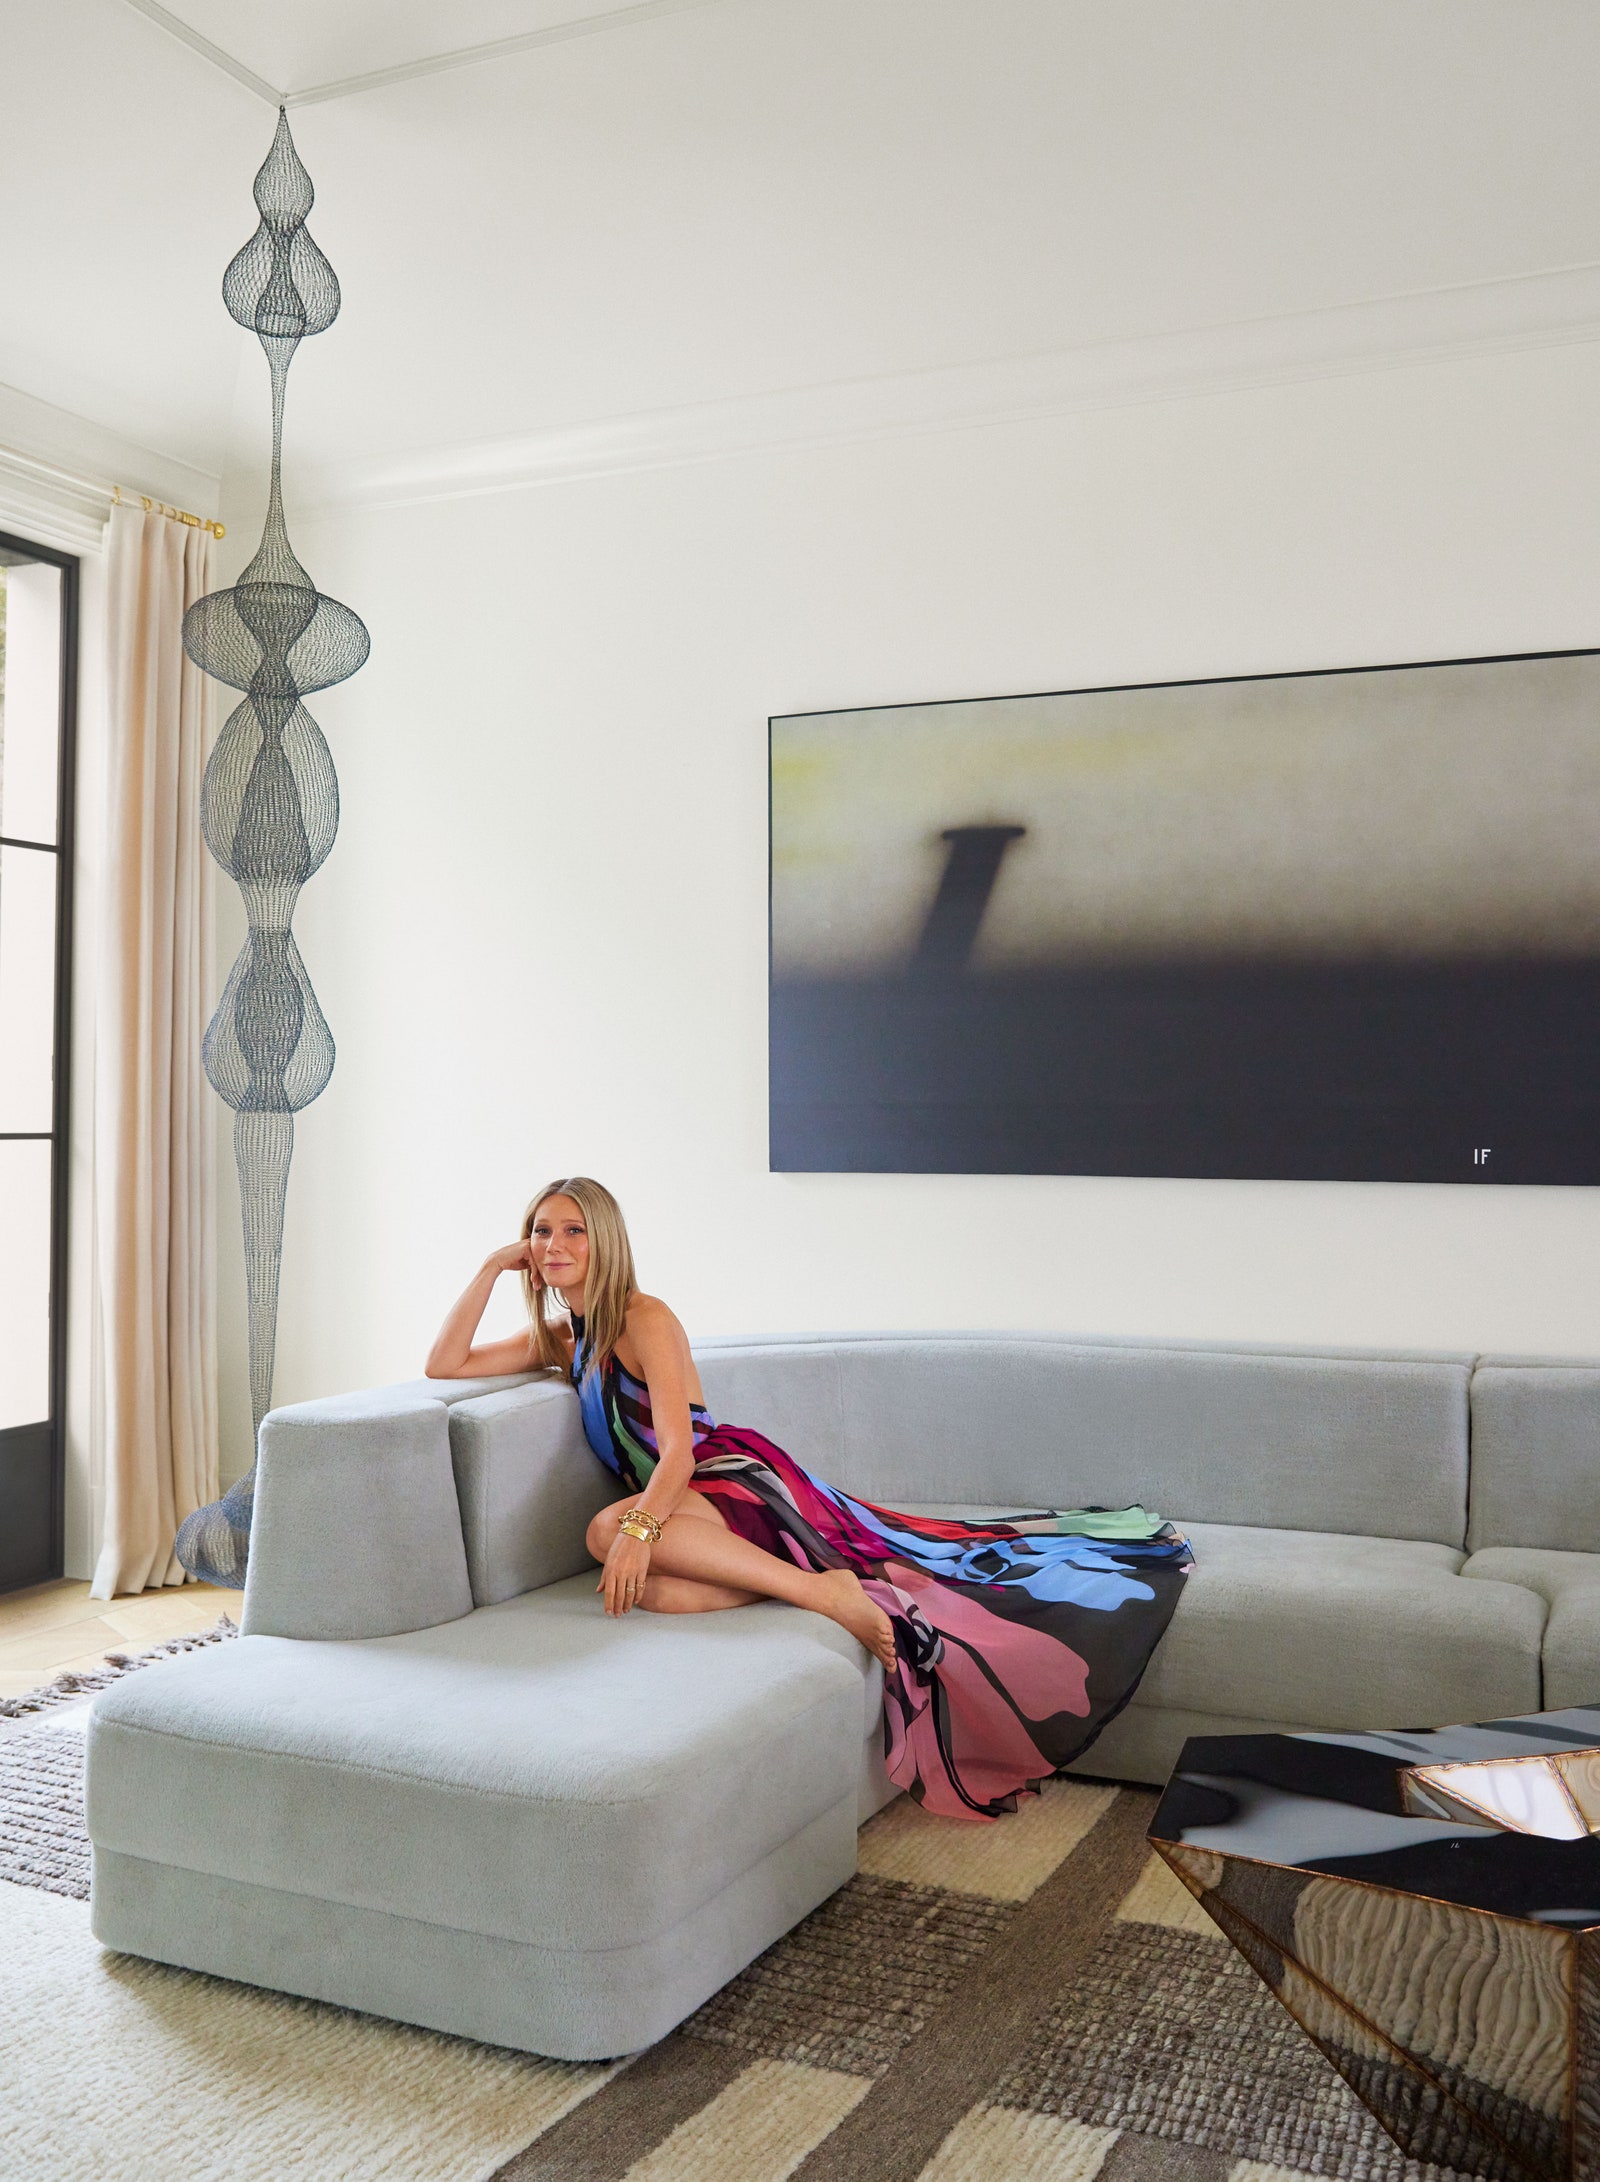 Gwyneth Paltrow's Home Tour, As Seen in Architectural Digest | lark & linen